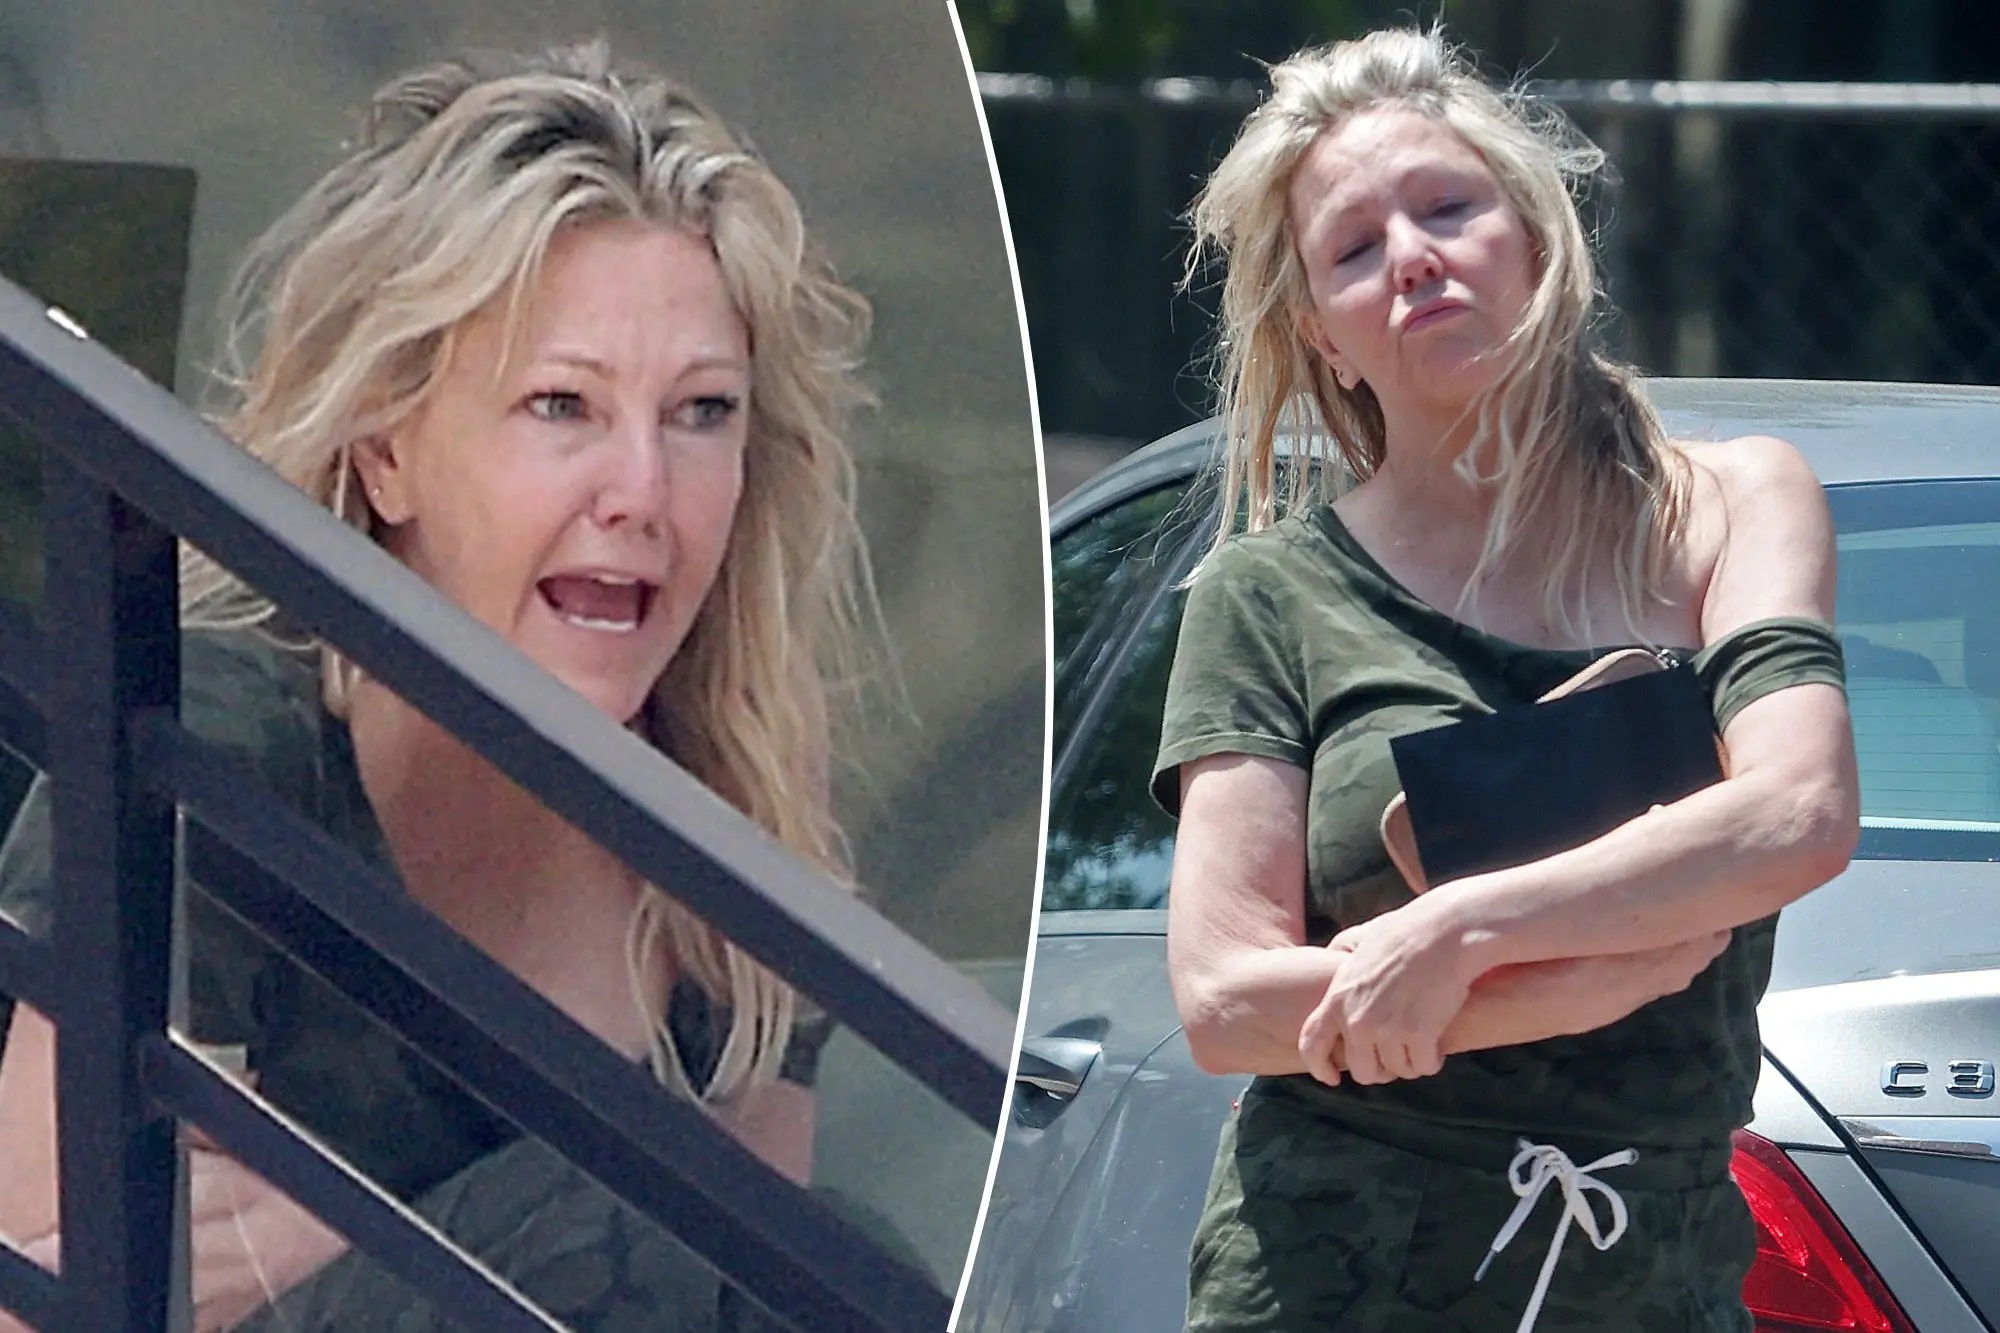 This is what drugs and alcohol can do! The recent outing of Heather Locklear sparked reaction